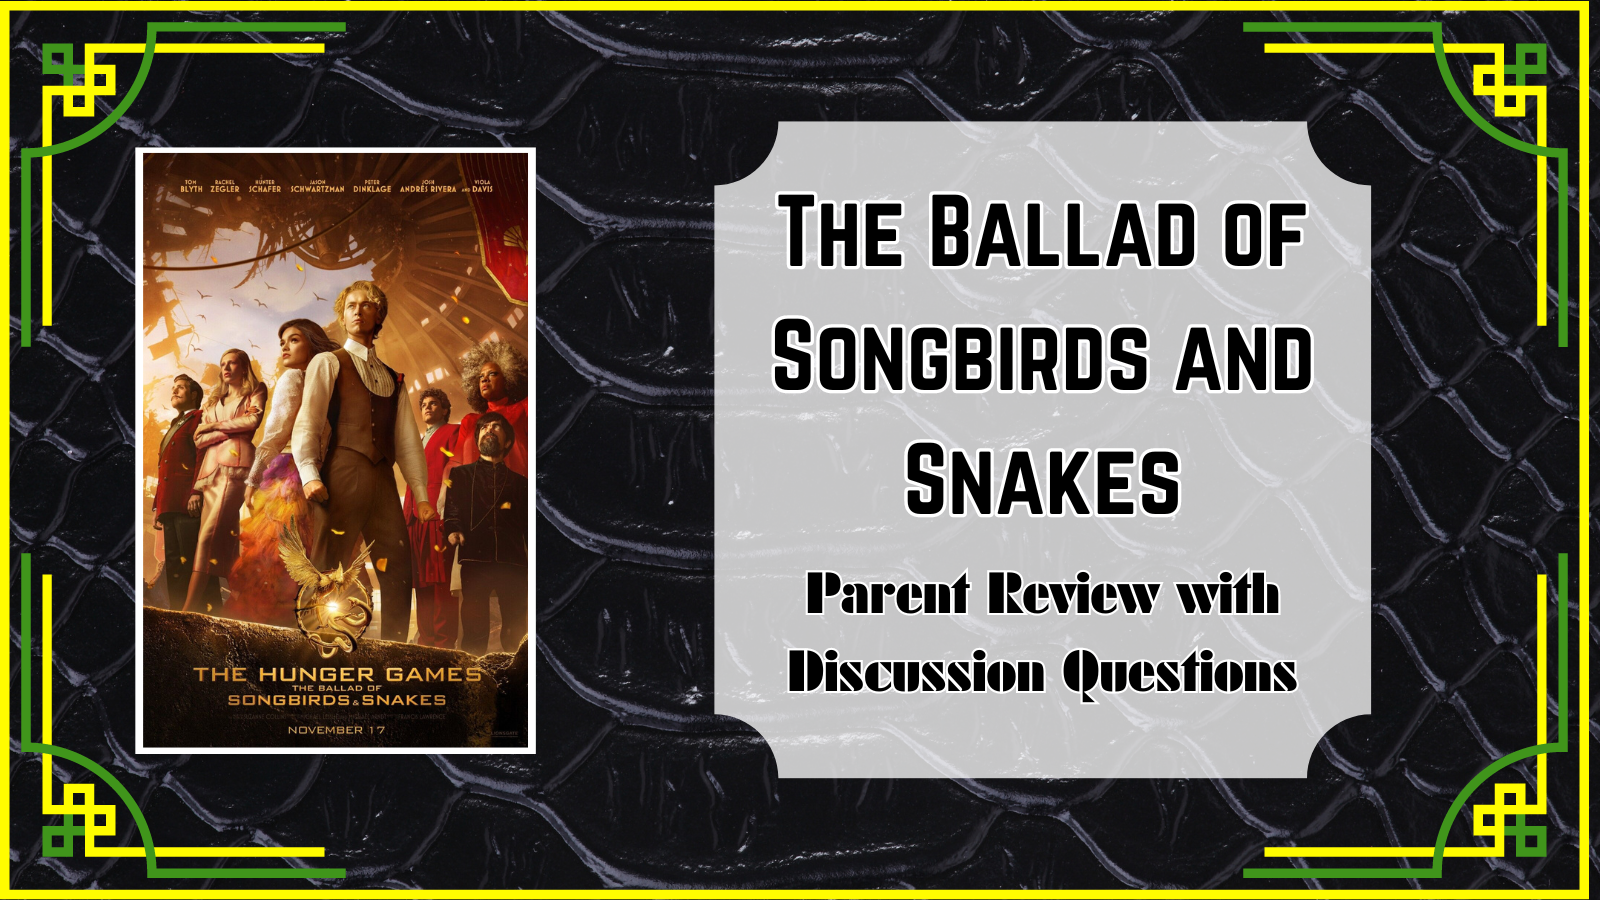 The Ballad of Songbirds and Snakes PArent Review